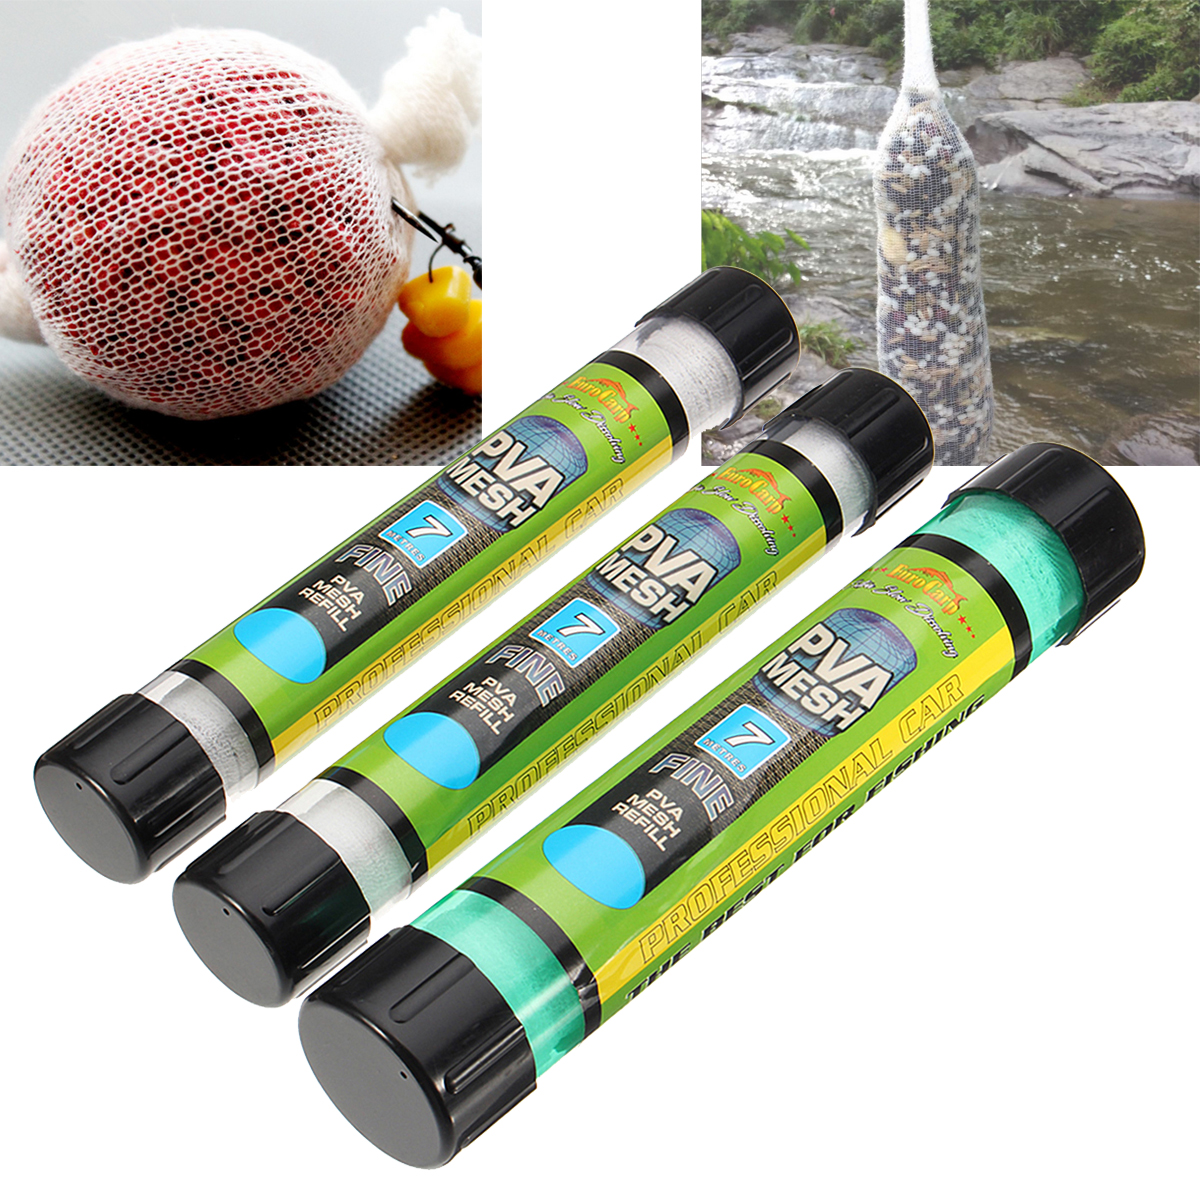 152537mm-Width-PVA-Wide-Wire-Mesh-Coarse-Fishing-Baits-Bag-Stocking-Plunger-Stick-Tube-7m-Length-1298089-4